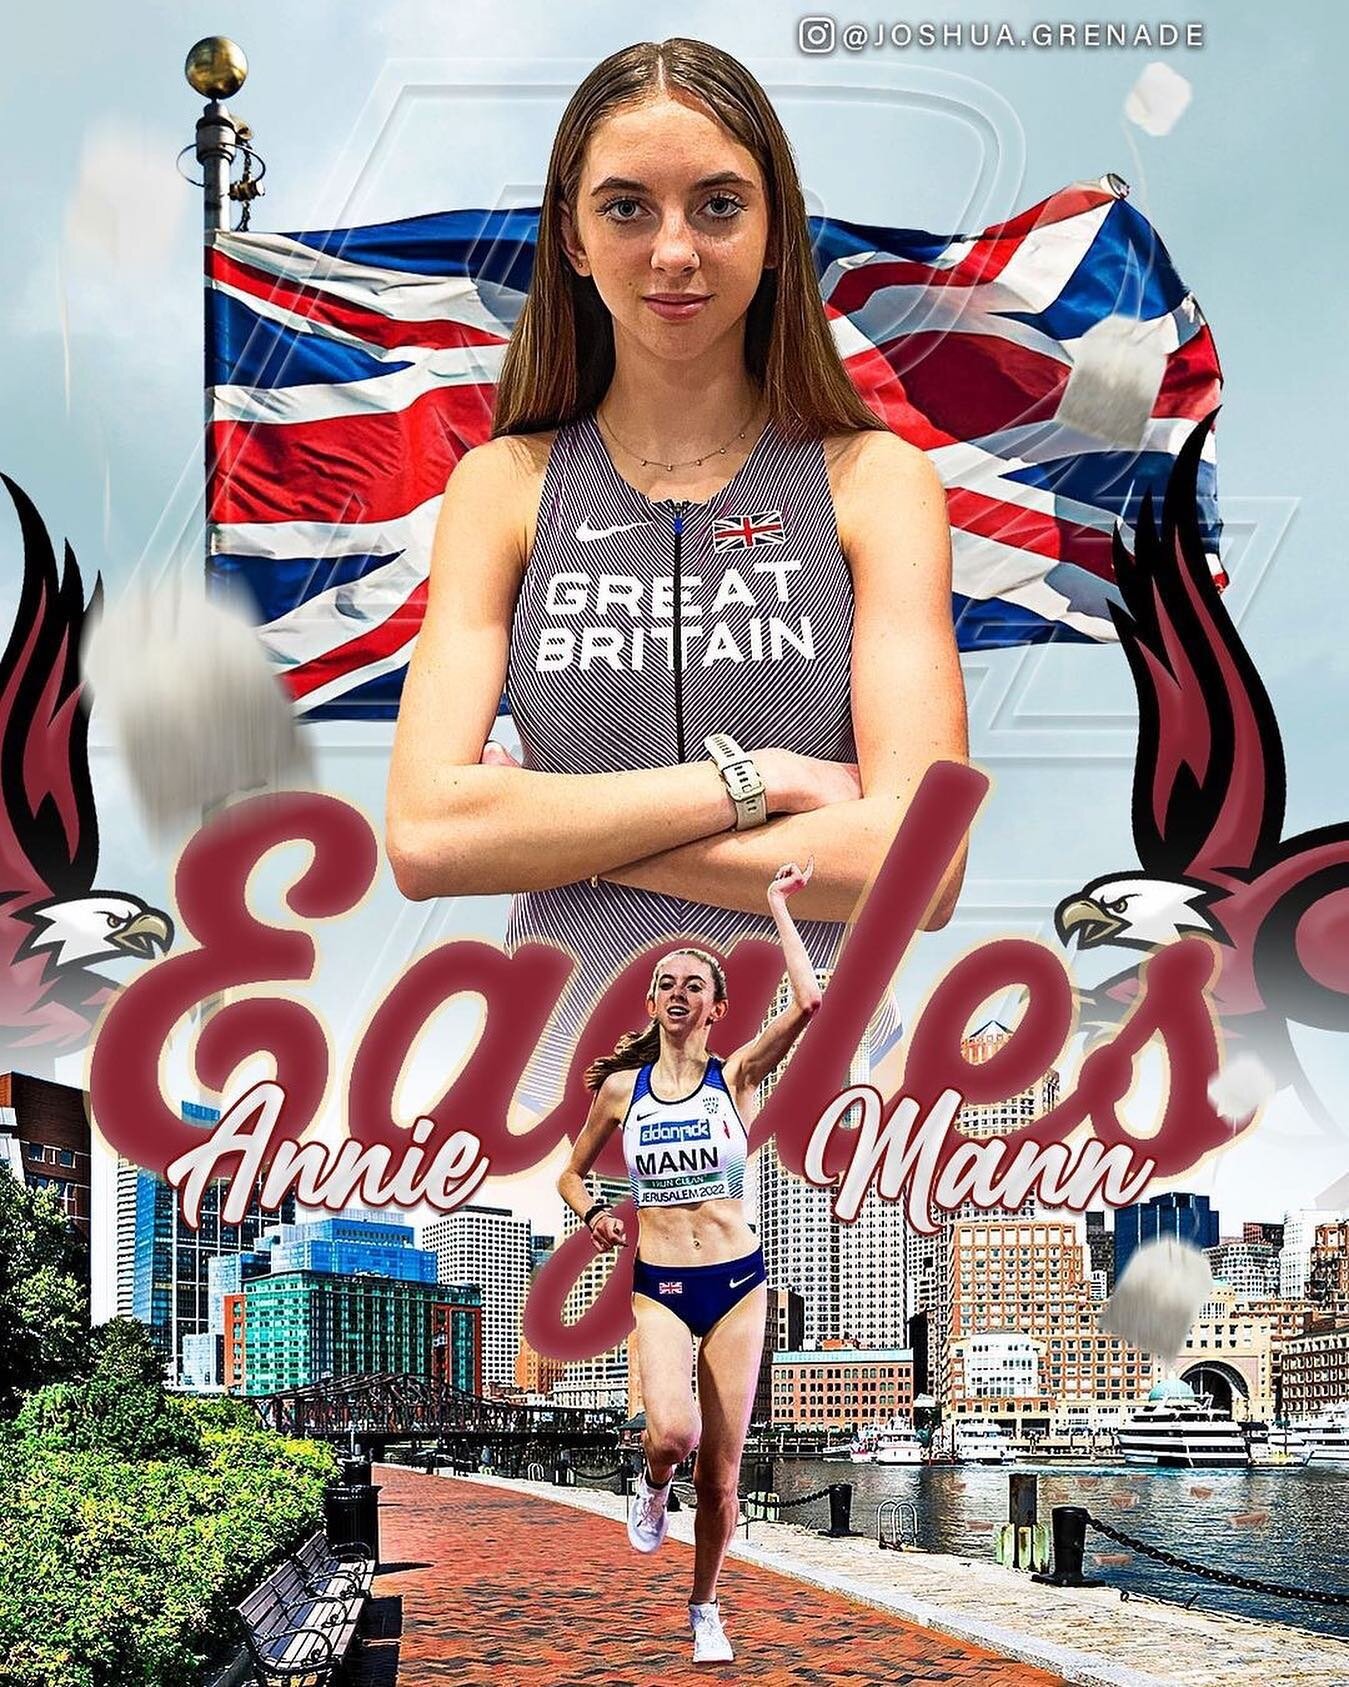 Boston Bound&hellip; 🇺🇸 

Congratulations Annie, we look forward to watching you fly 🦅

&ldquo;Incredibly excited to announce my commitment to Boston College to continue my athletic and academic career! Thank you to all those who have supported me